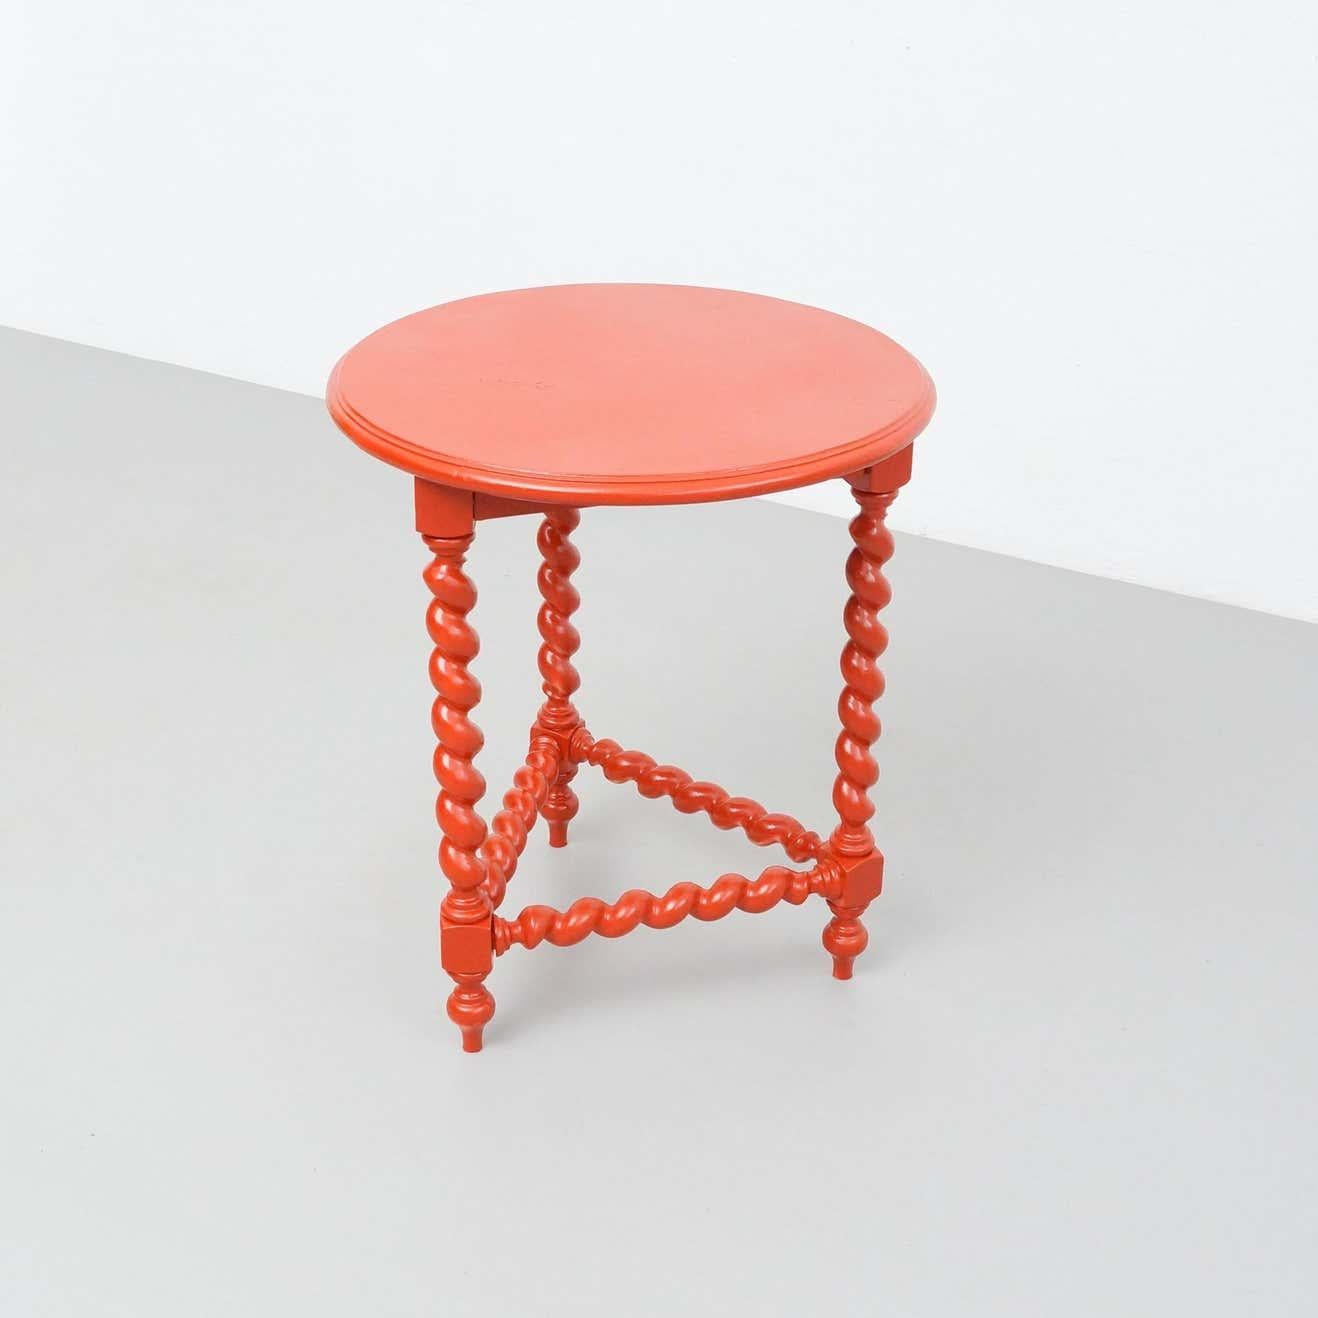 Mid-20th Century Antique French Wood Table Painted in Red, circa 1930